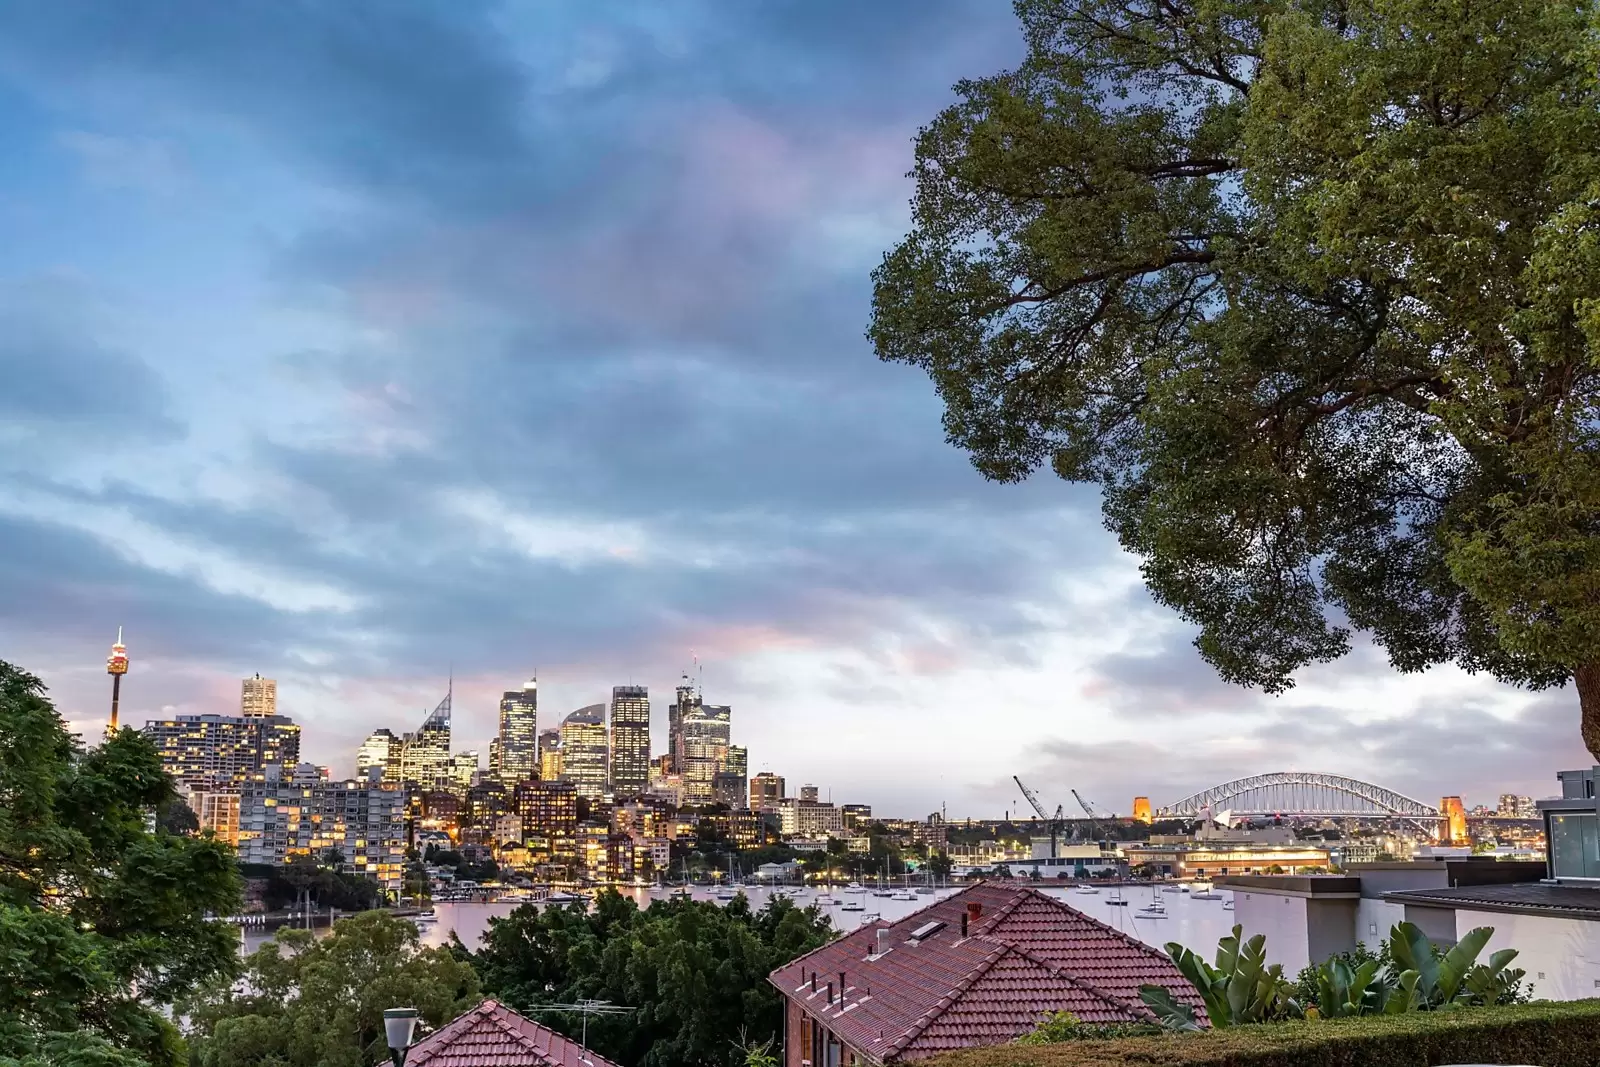 Photo #14: 1/5 Goomerah Crescent, Darling Point - Sold by Sydney Sotheby's International Realty